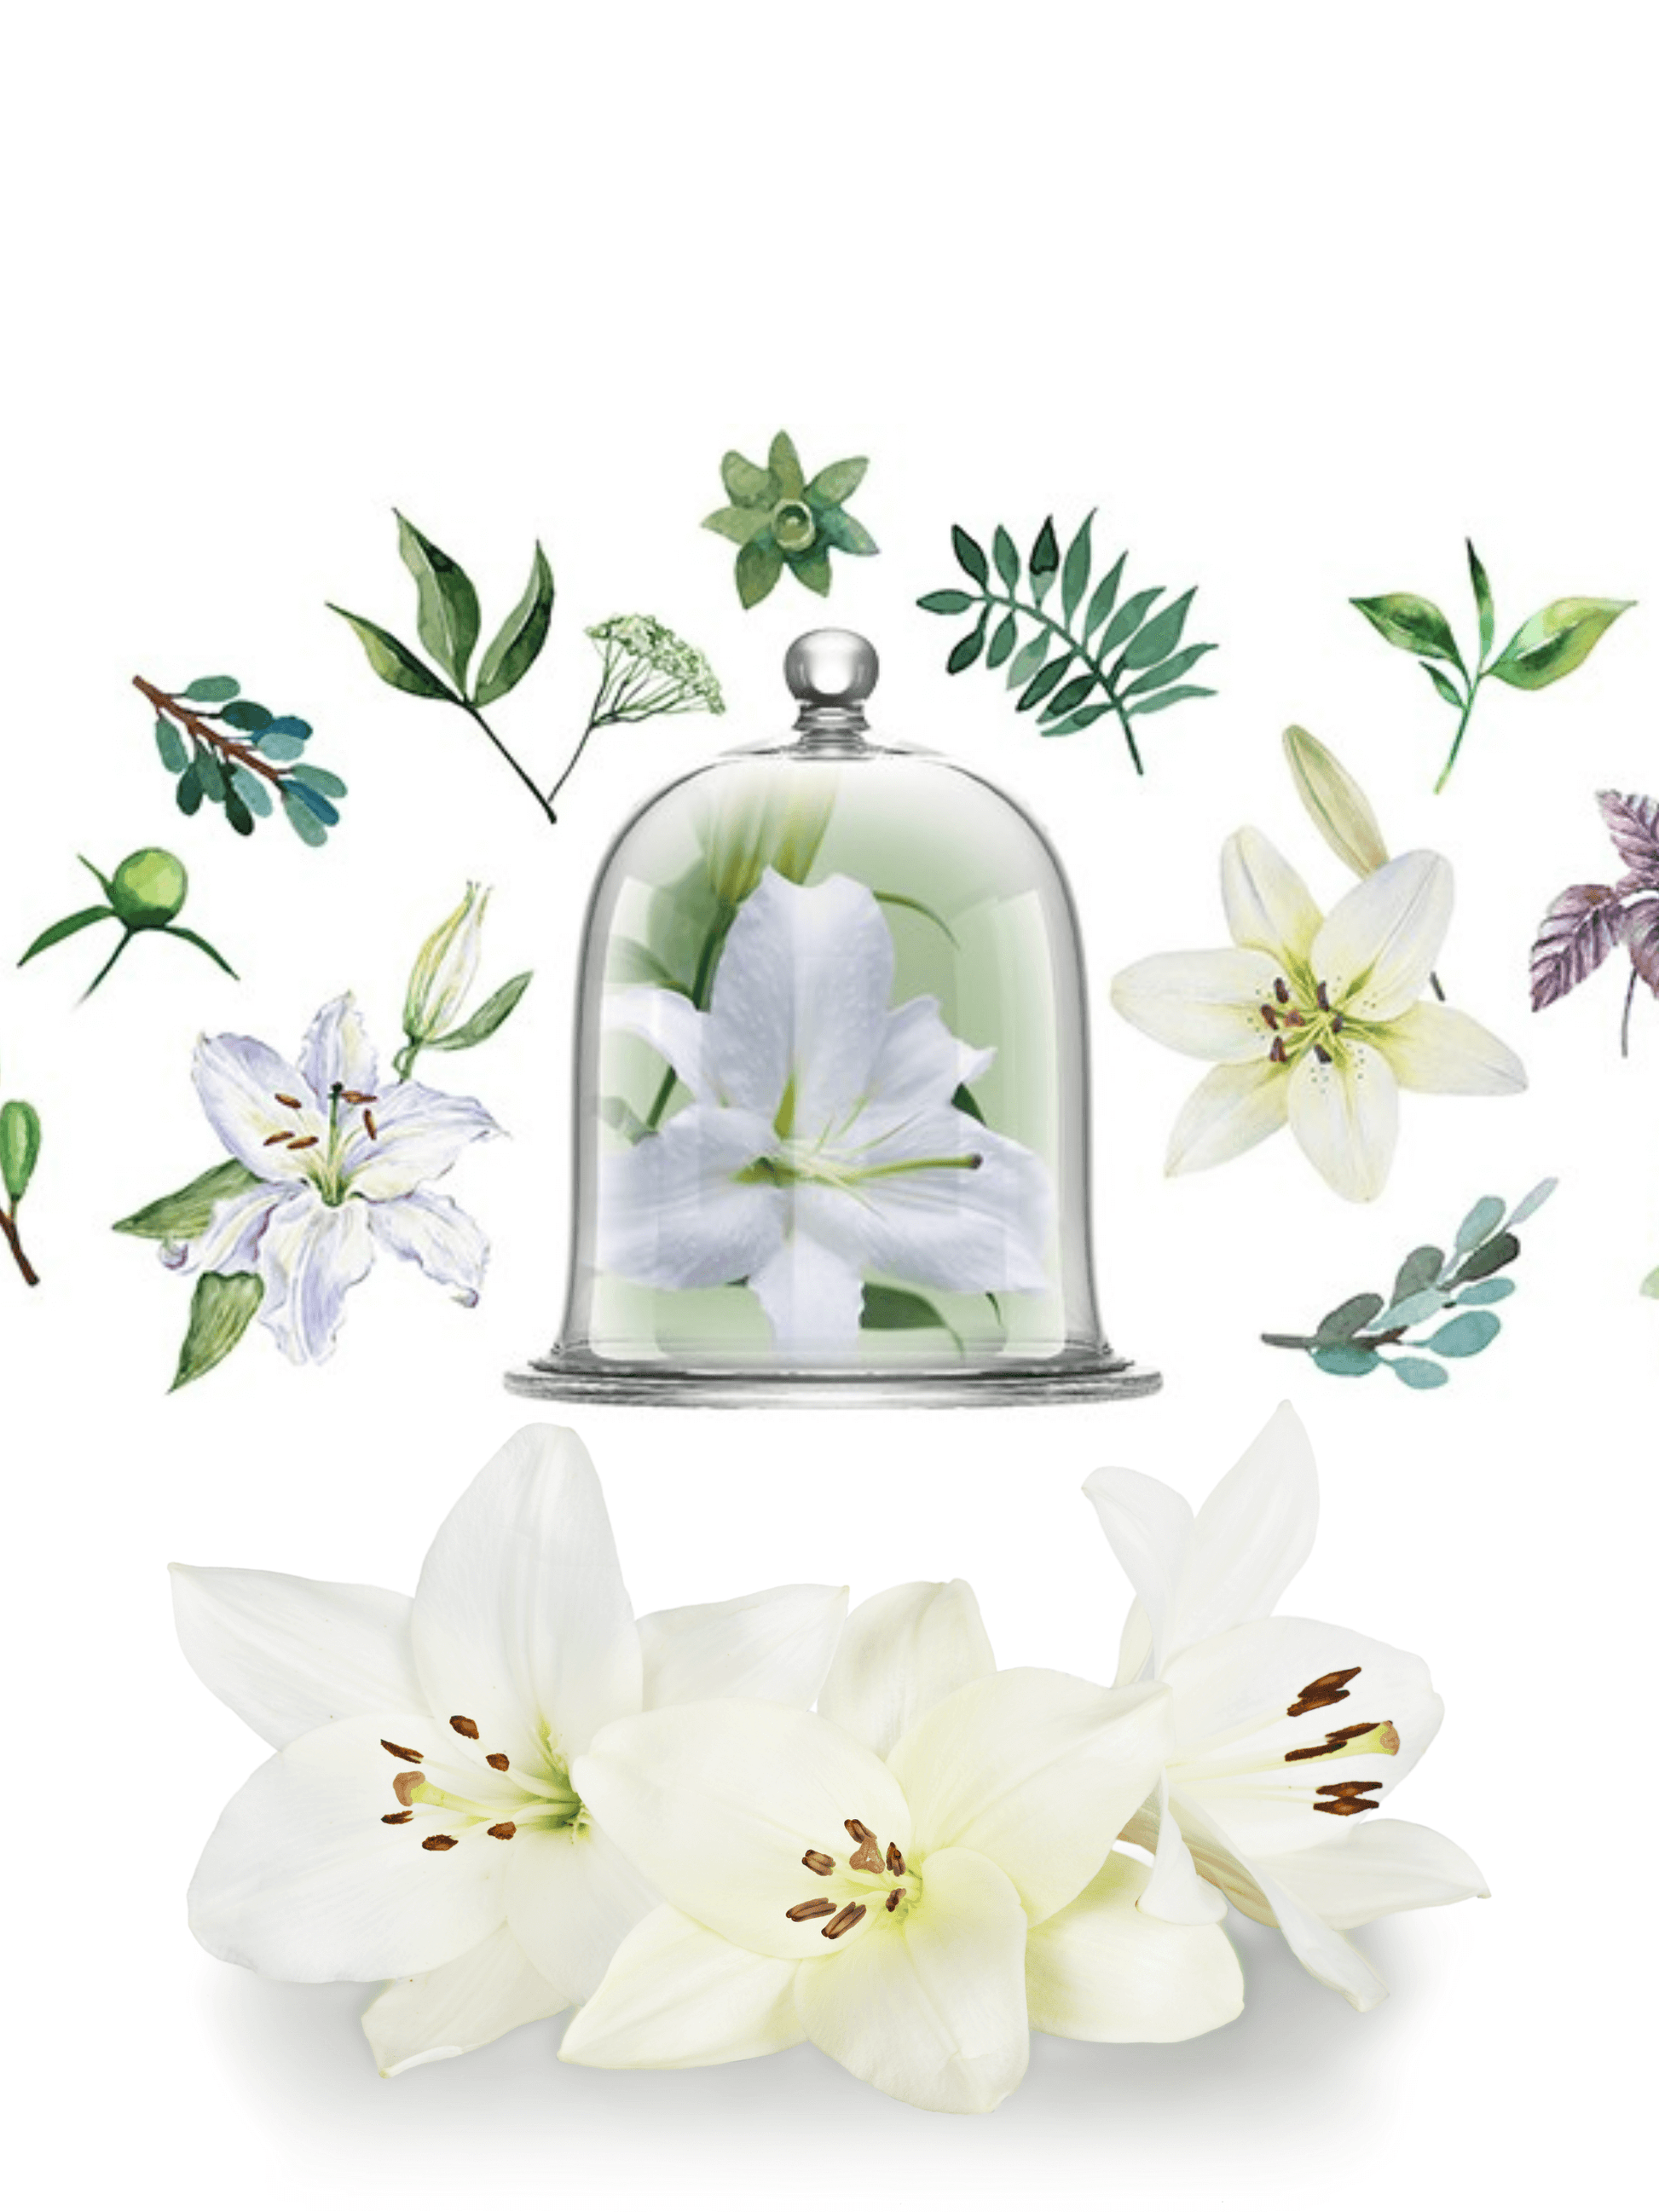 Porcelain Diffuser Fresh Lily Fragrance by Chando 100ml White/Green